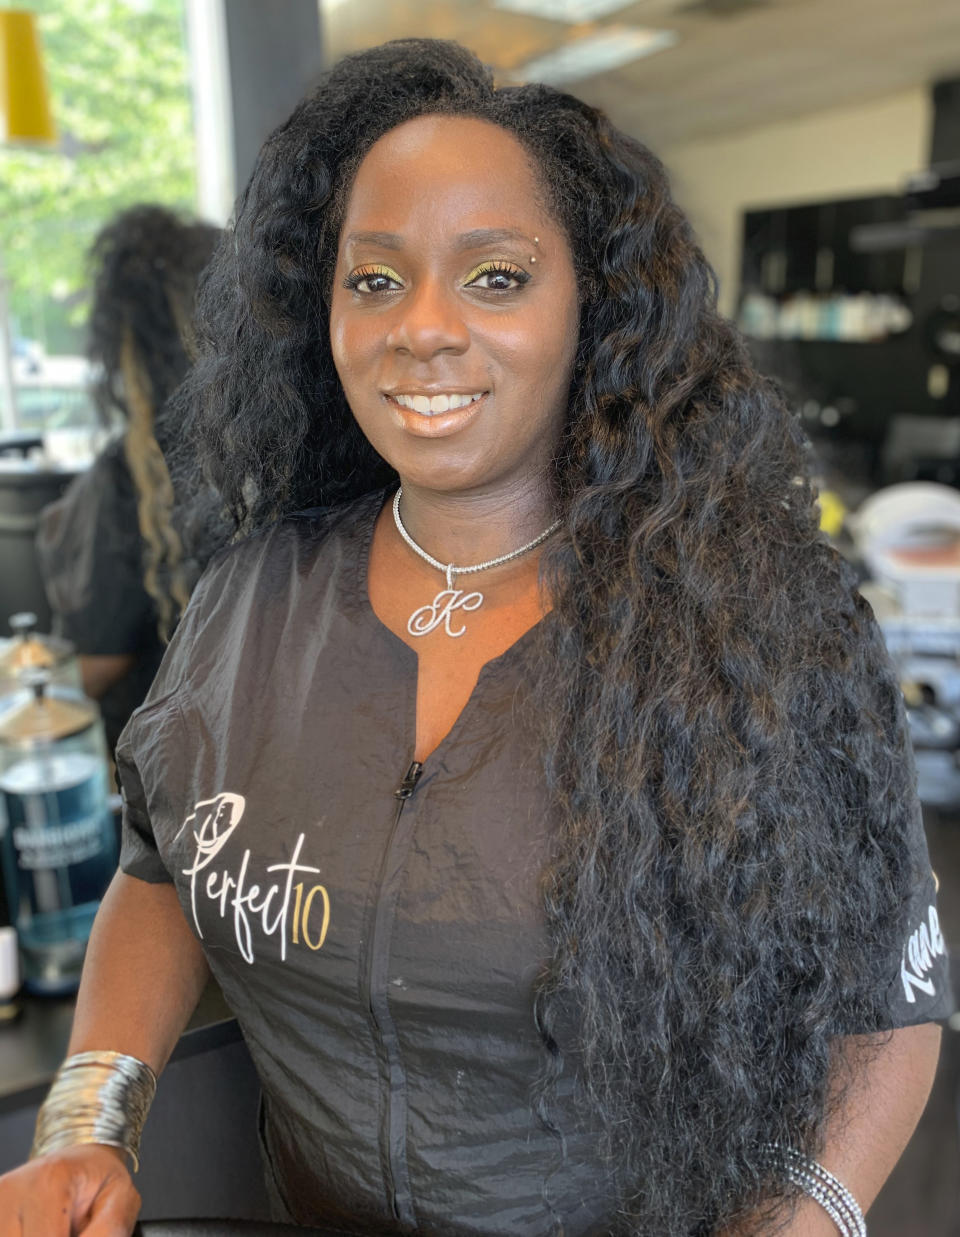 This image provided by Isis Alexander shows cosmetologist Kanessa Alexander. After repeatedly being denied service by high-end salons because her hair was perceived as too difficult to style, Alexander opened a shop of her own in a predominantly white Boston neighborhood with four Black stylists serving all hair textures. Alexander and more than a dozen other people of color in the industry trace such bias and discrimination in predominantly white salons to the sidelining of formal education focused on Black hair. Horror stories are not uncommon, from outright refusal of service to botched treatments and cuts by stylists who don't know what they're doing. (Isis Alexander via AP)